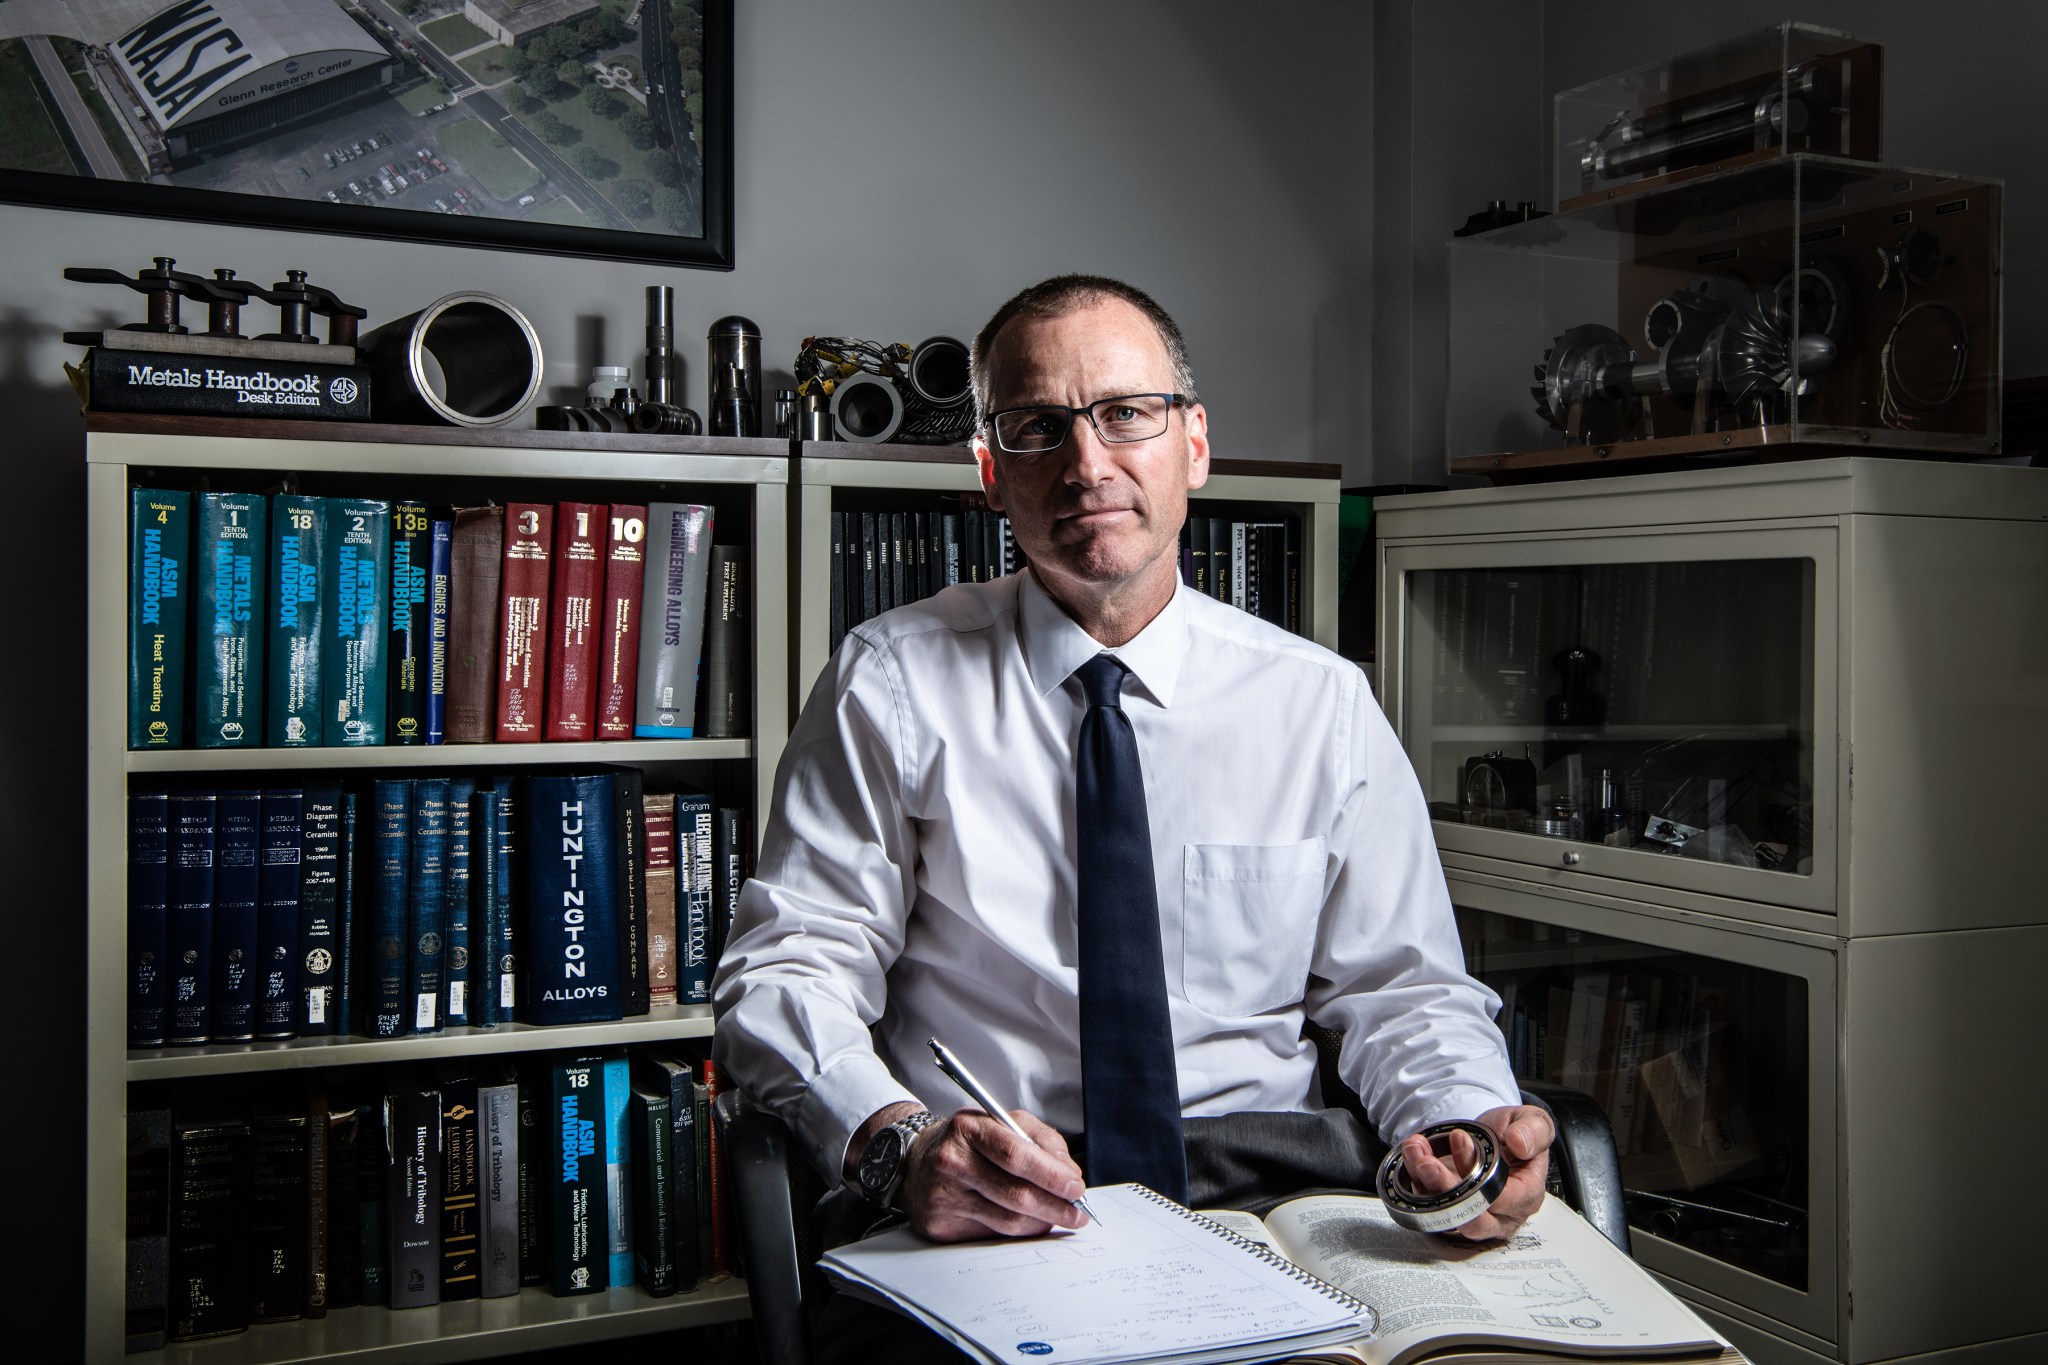 Dr. Christopher DellaCorte wears a white shirt, tie, and glasses, is shown facing the camera as he sits in an office with book shelves visible behind him. He holds an open notebook, a pen, and Ball bearings made of Nitinol shape-memory alloy won’t rust or corrode.  